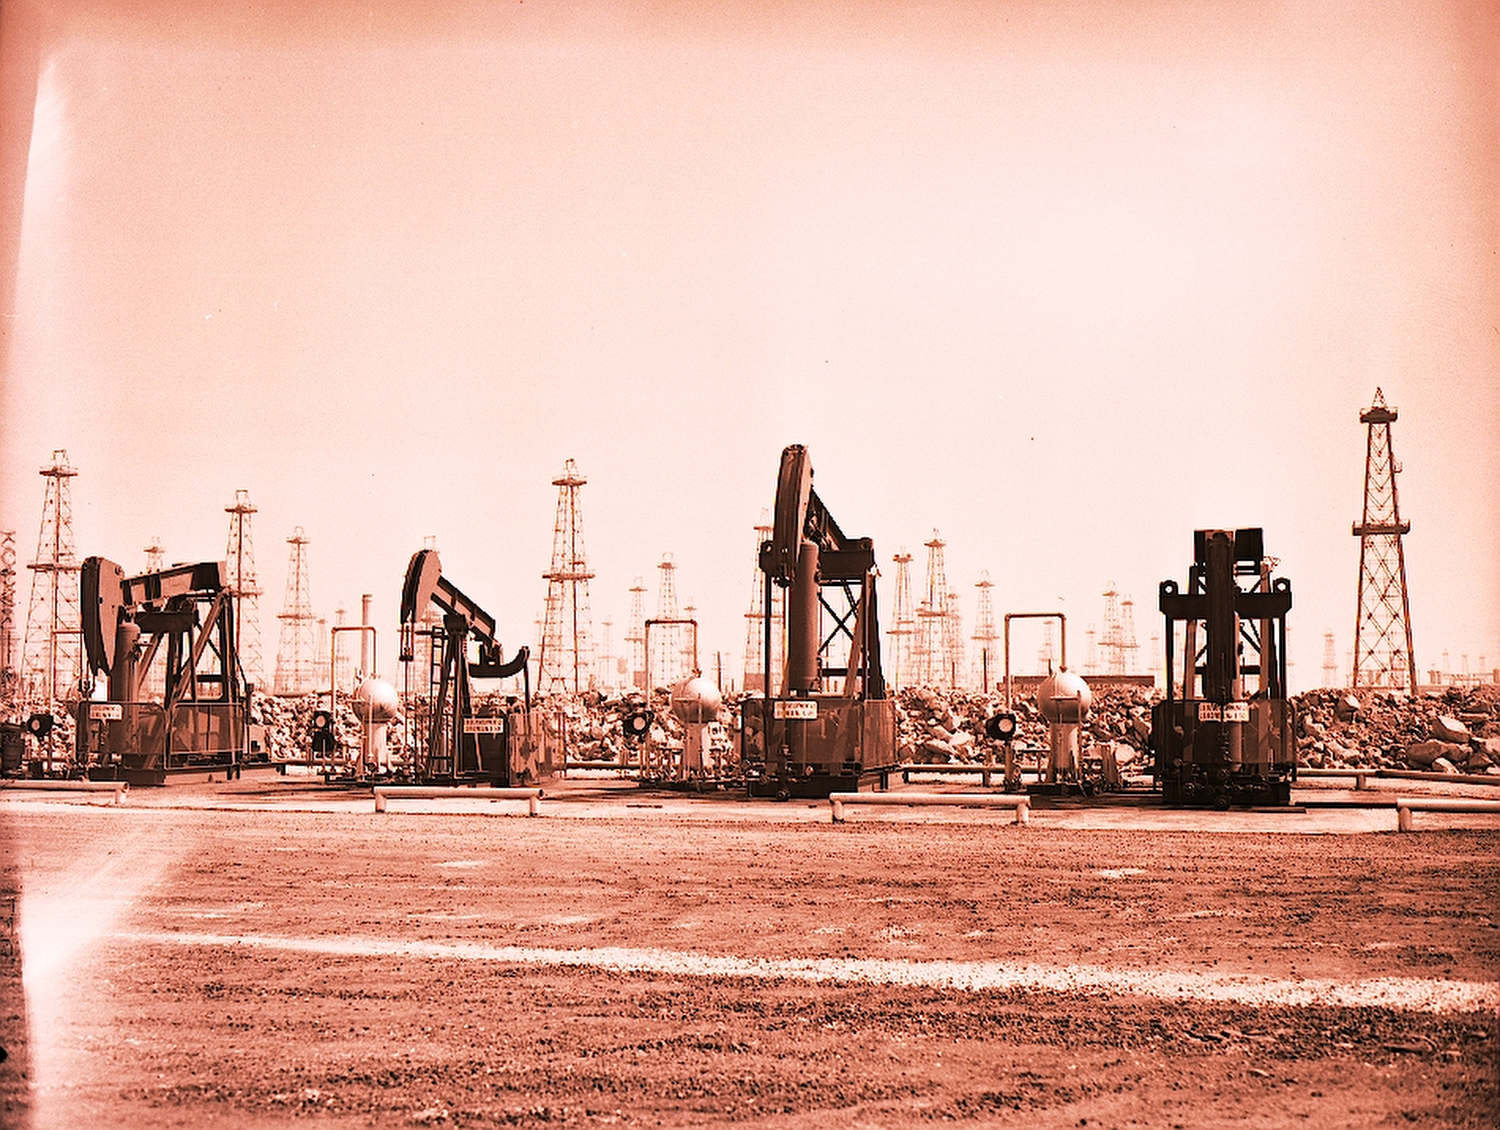 Oil extraction stepped up in the harbor in the 1940s. By 1945, subsidence began to be a serious problem around the Port.